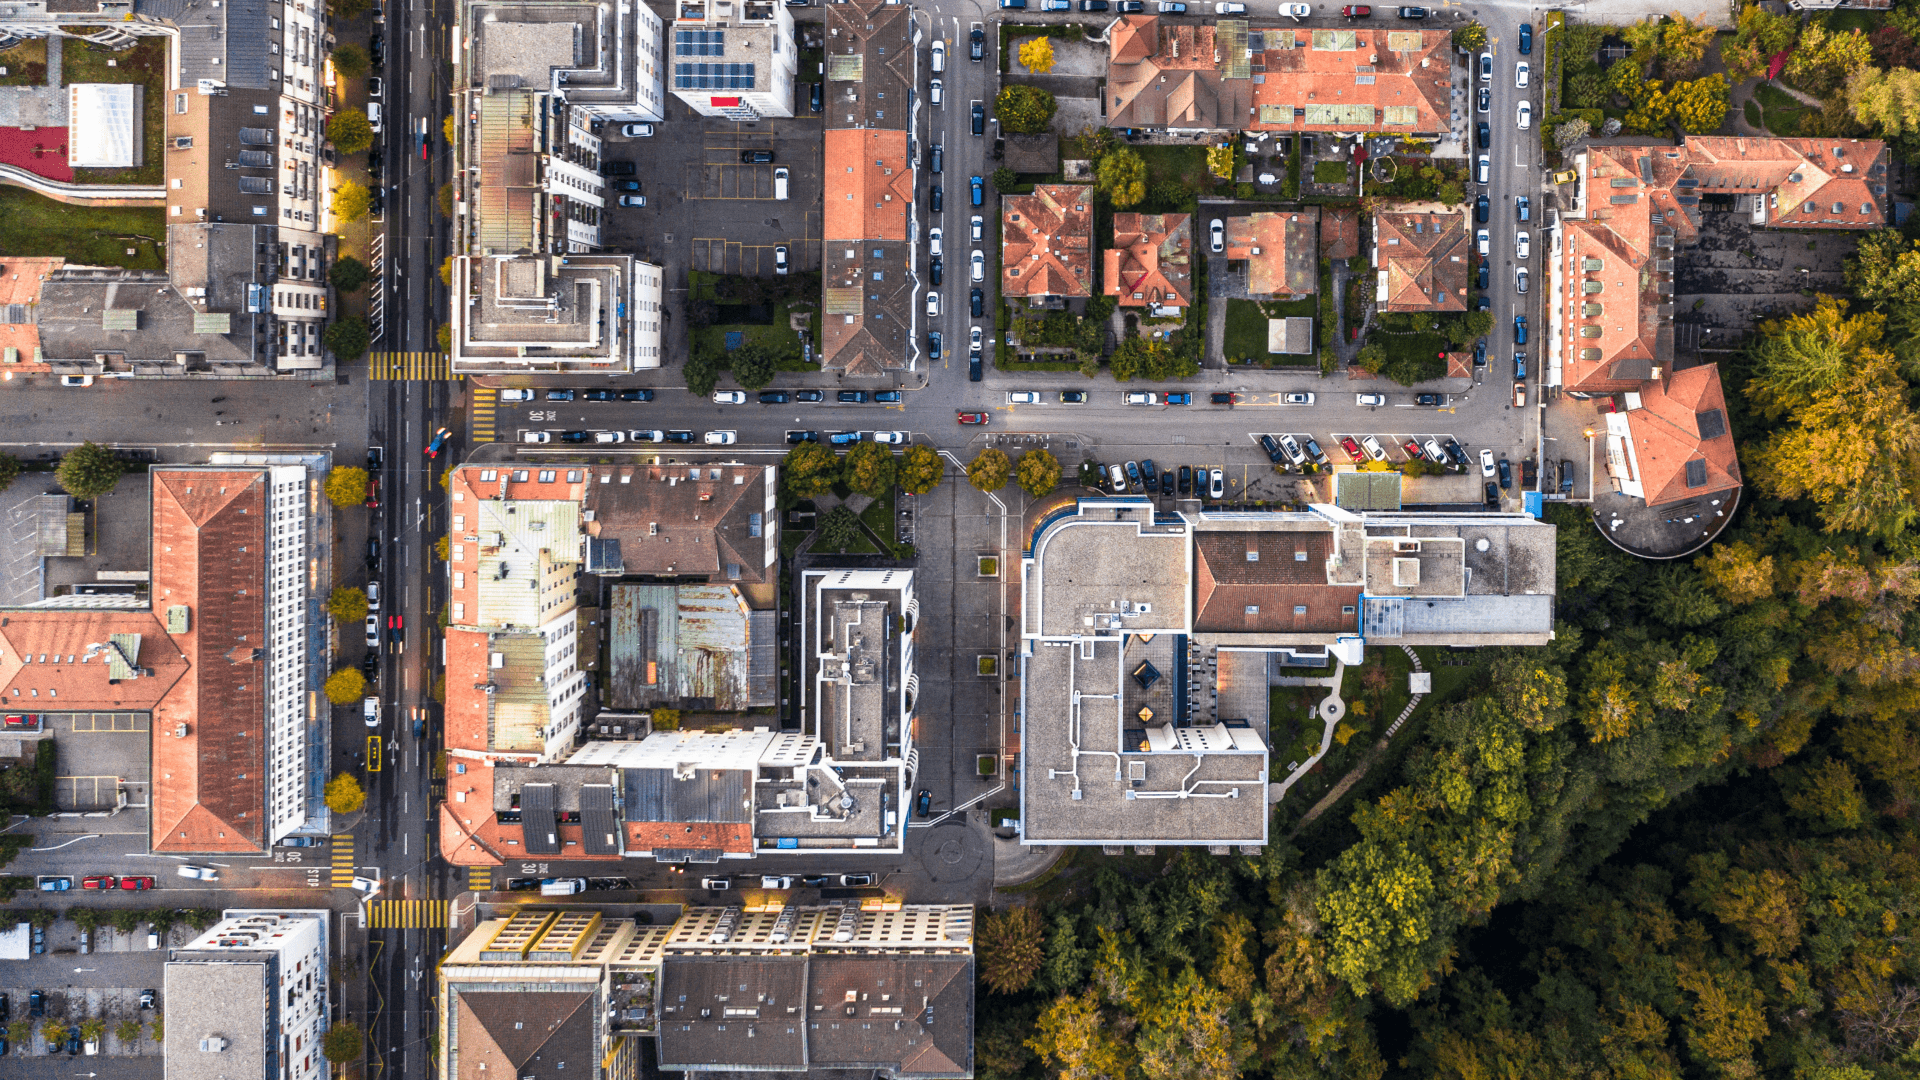 overhead view of several city blocks with a mix of large and small buildings, with a forested park on the lower right corner